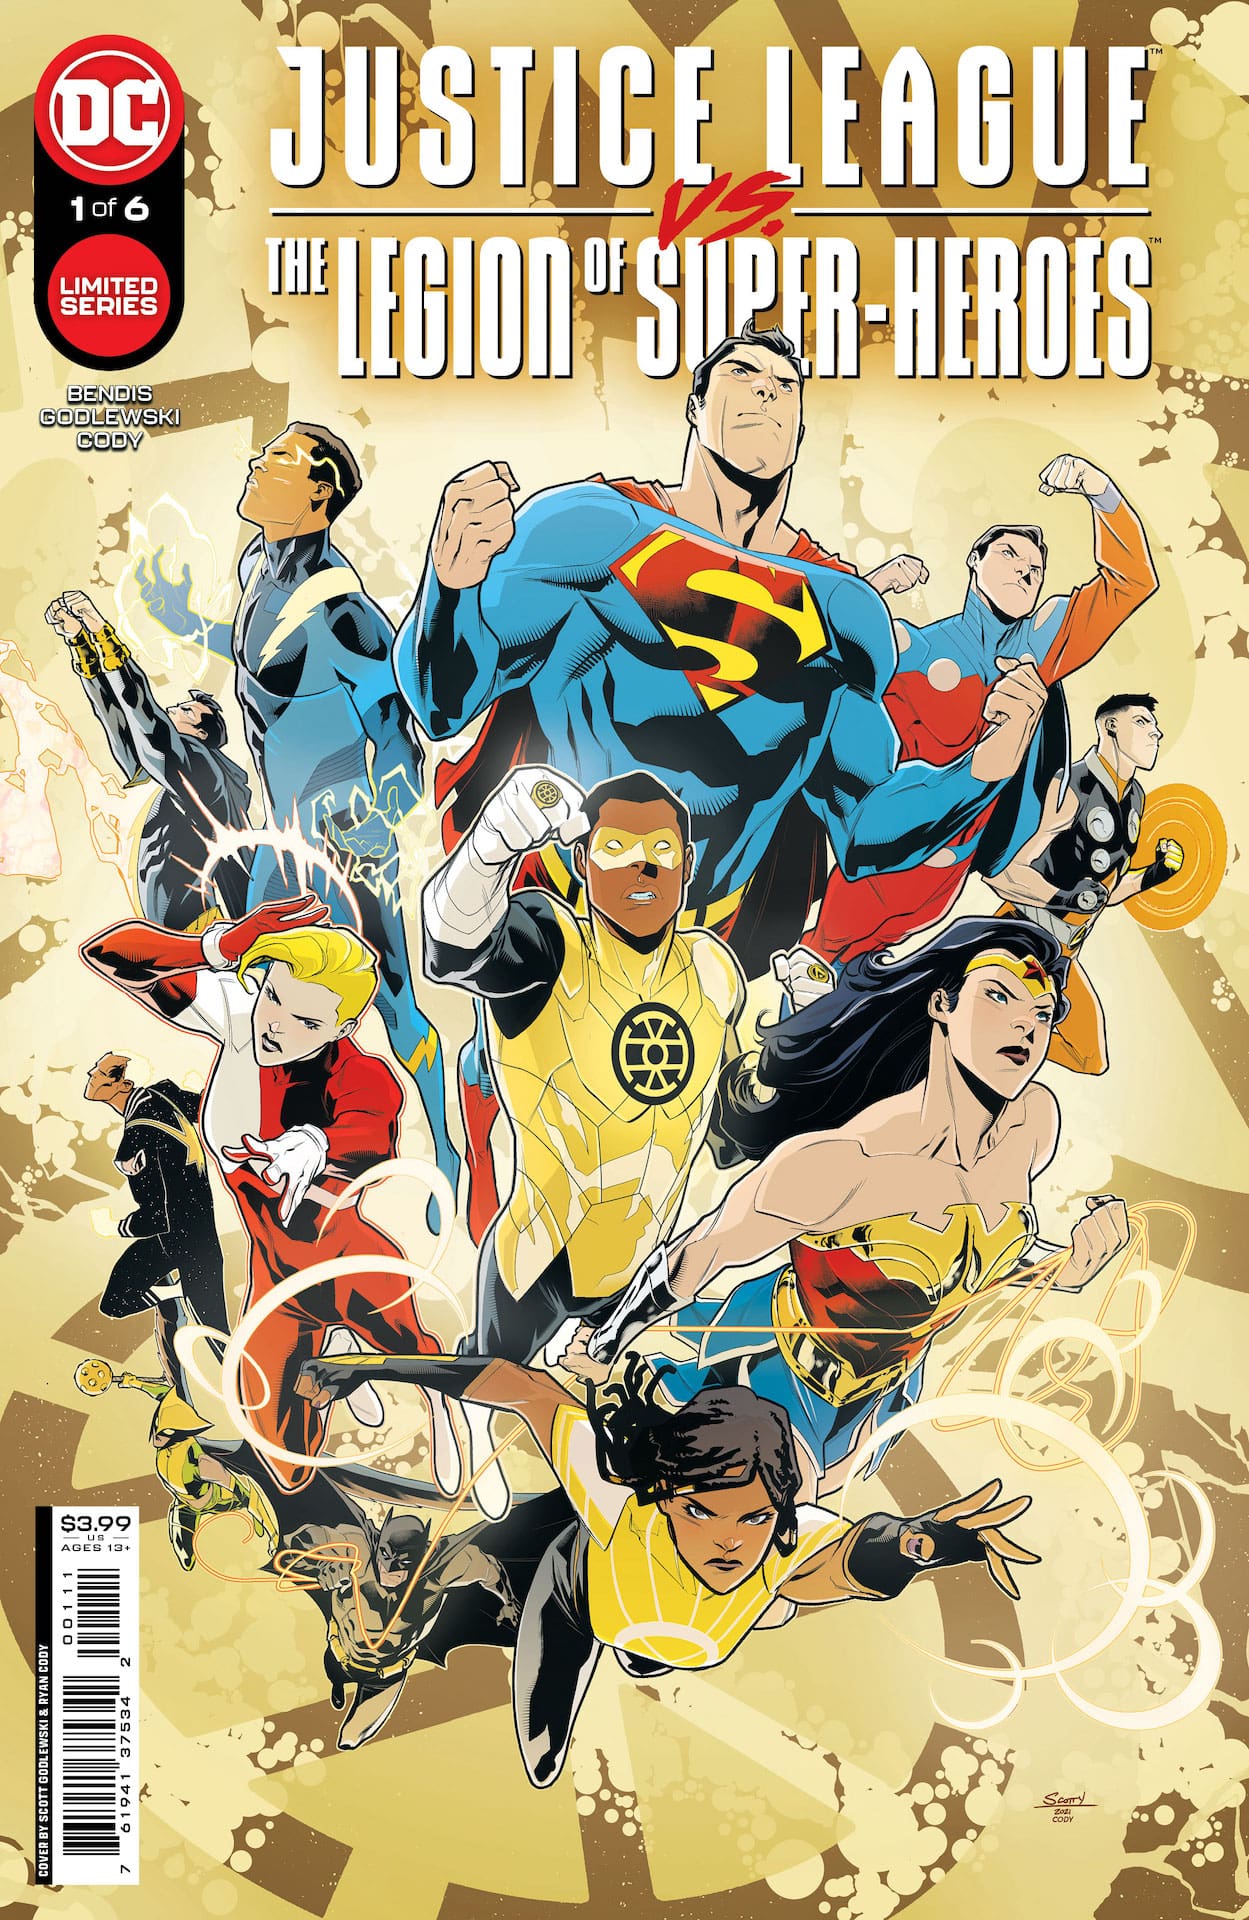 DC Preview: Justice League vs. The Legion of Super-Heroes #1